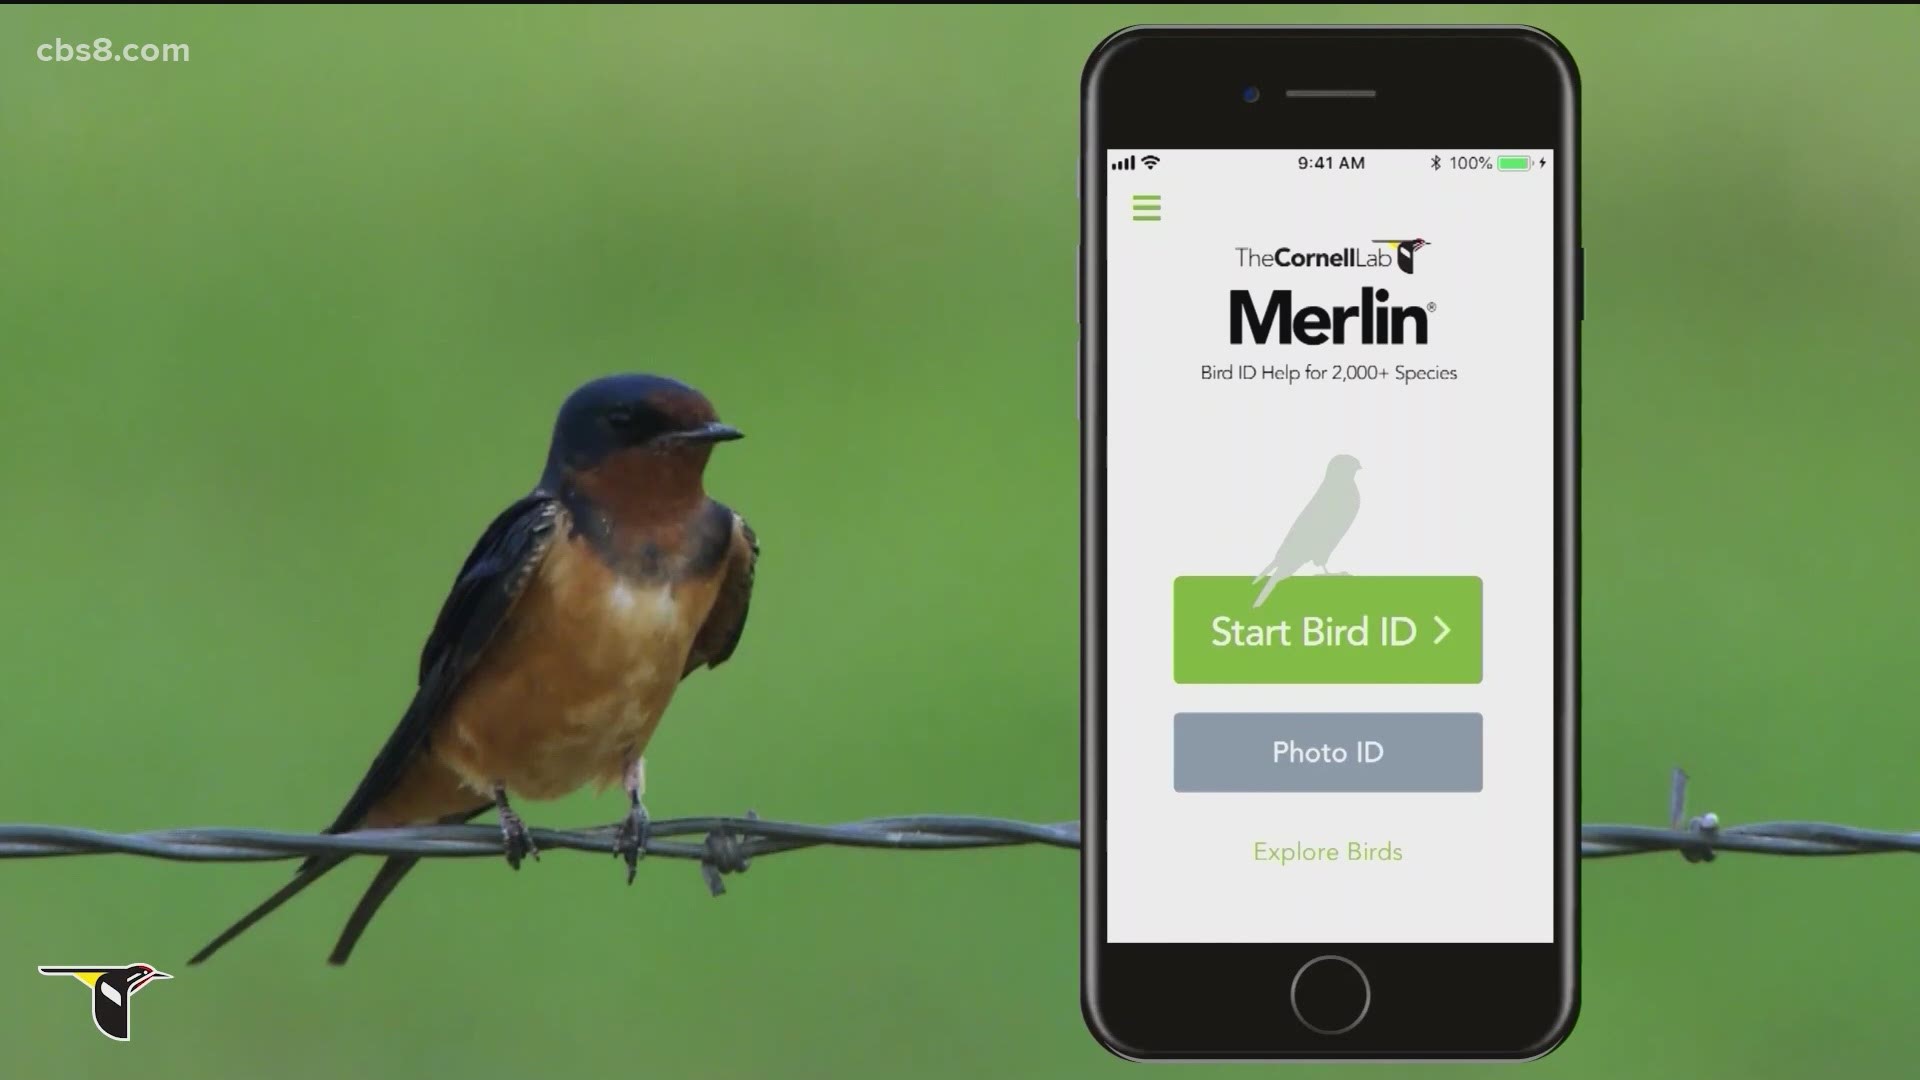 With over 500 species in San Diego, the app created at Cornell University can use a picture or a series of questions to pinpoint what bird you're looking at.